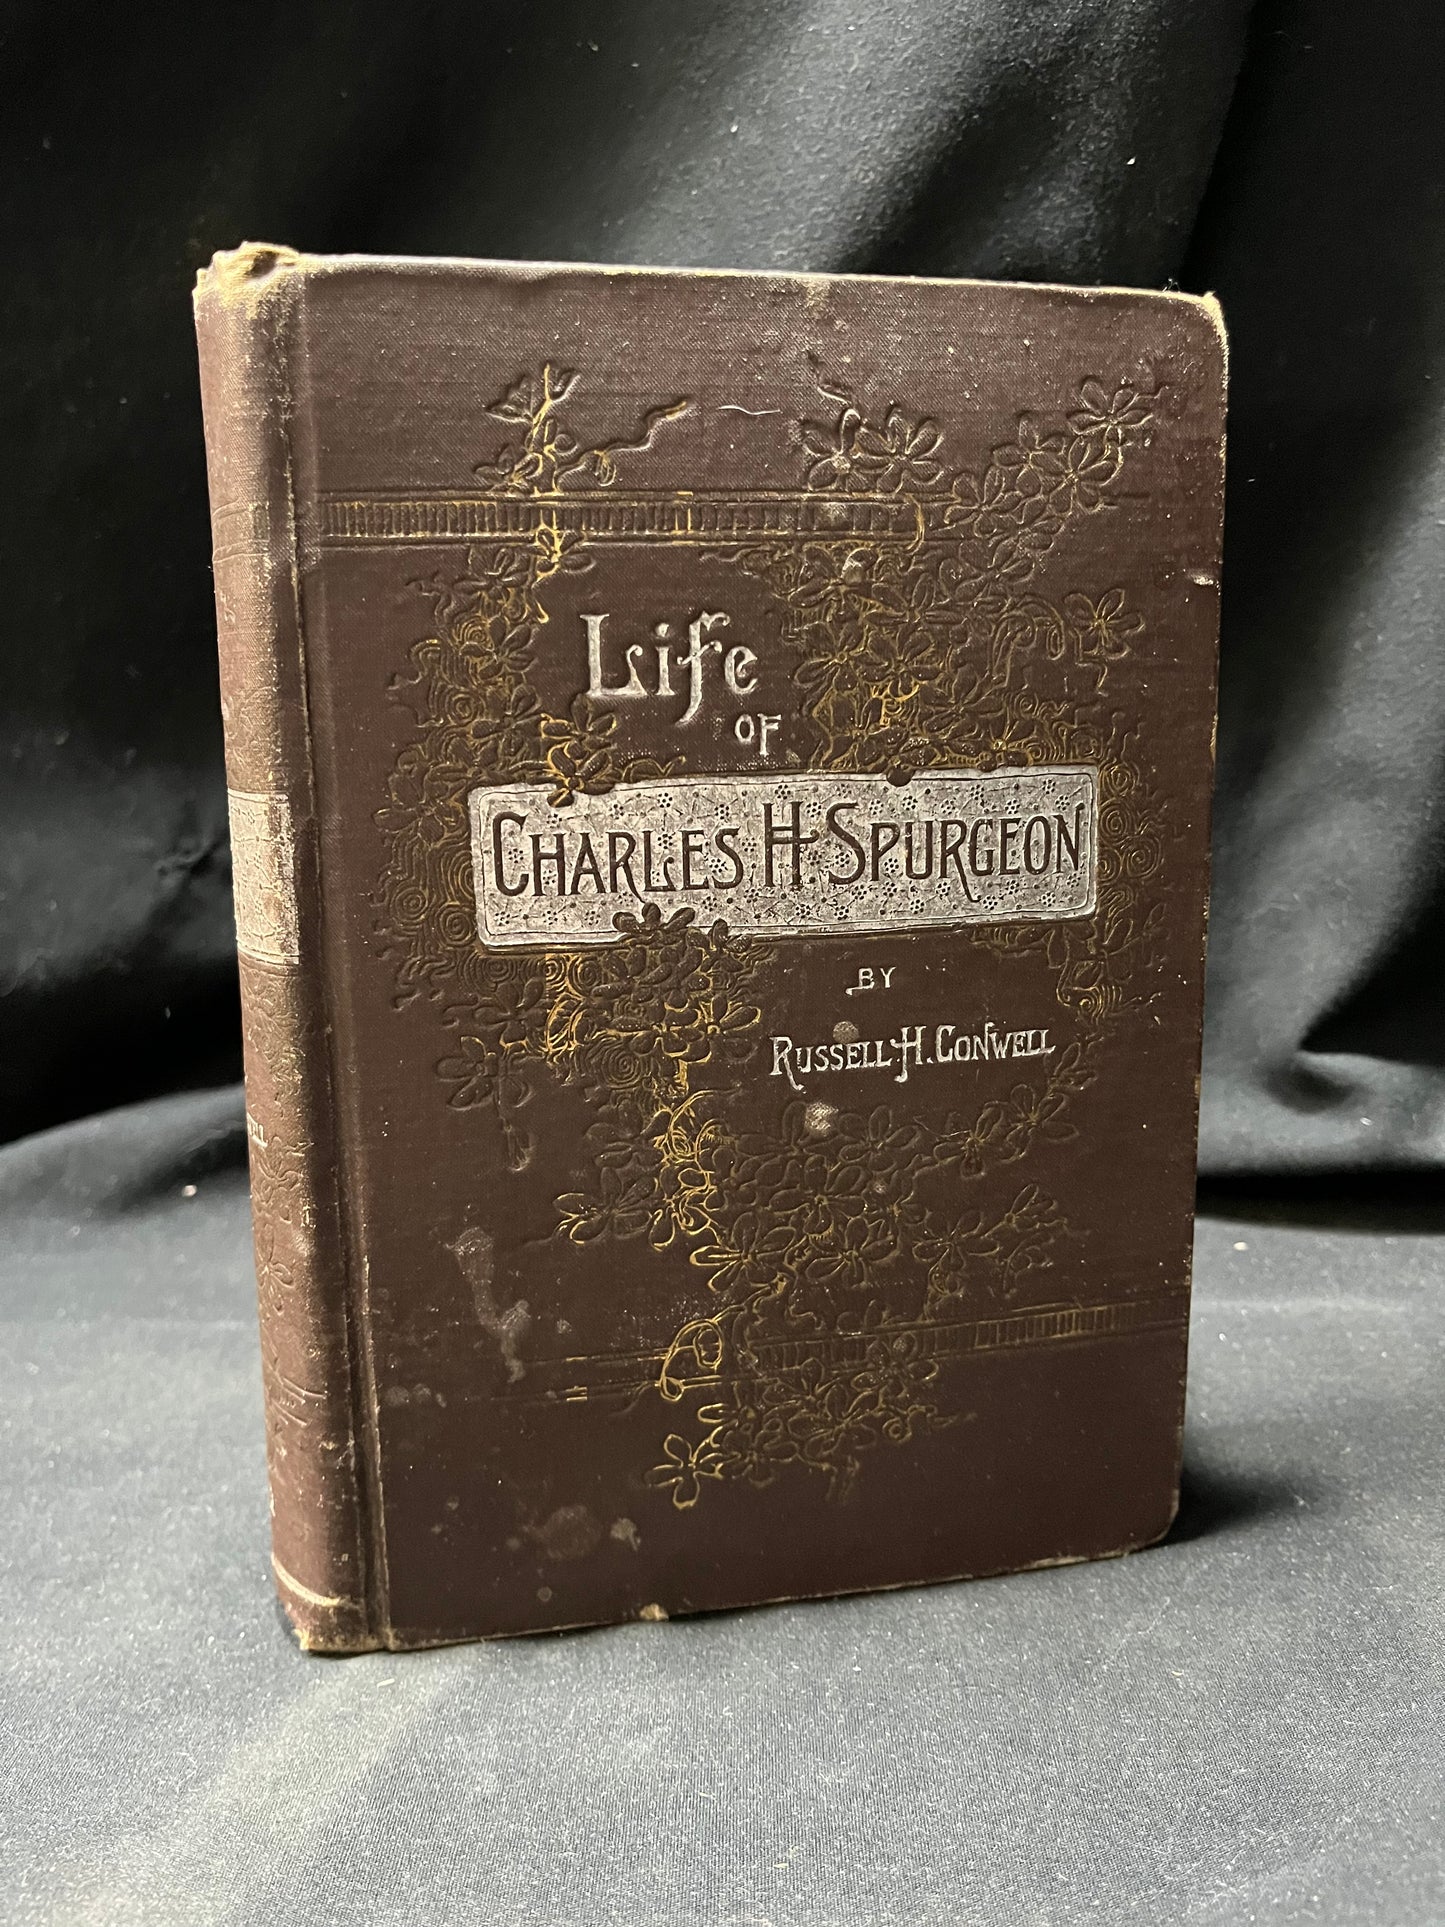 Life of Charles H. Spurgeon by Russell H. Conwell Hardcover